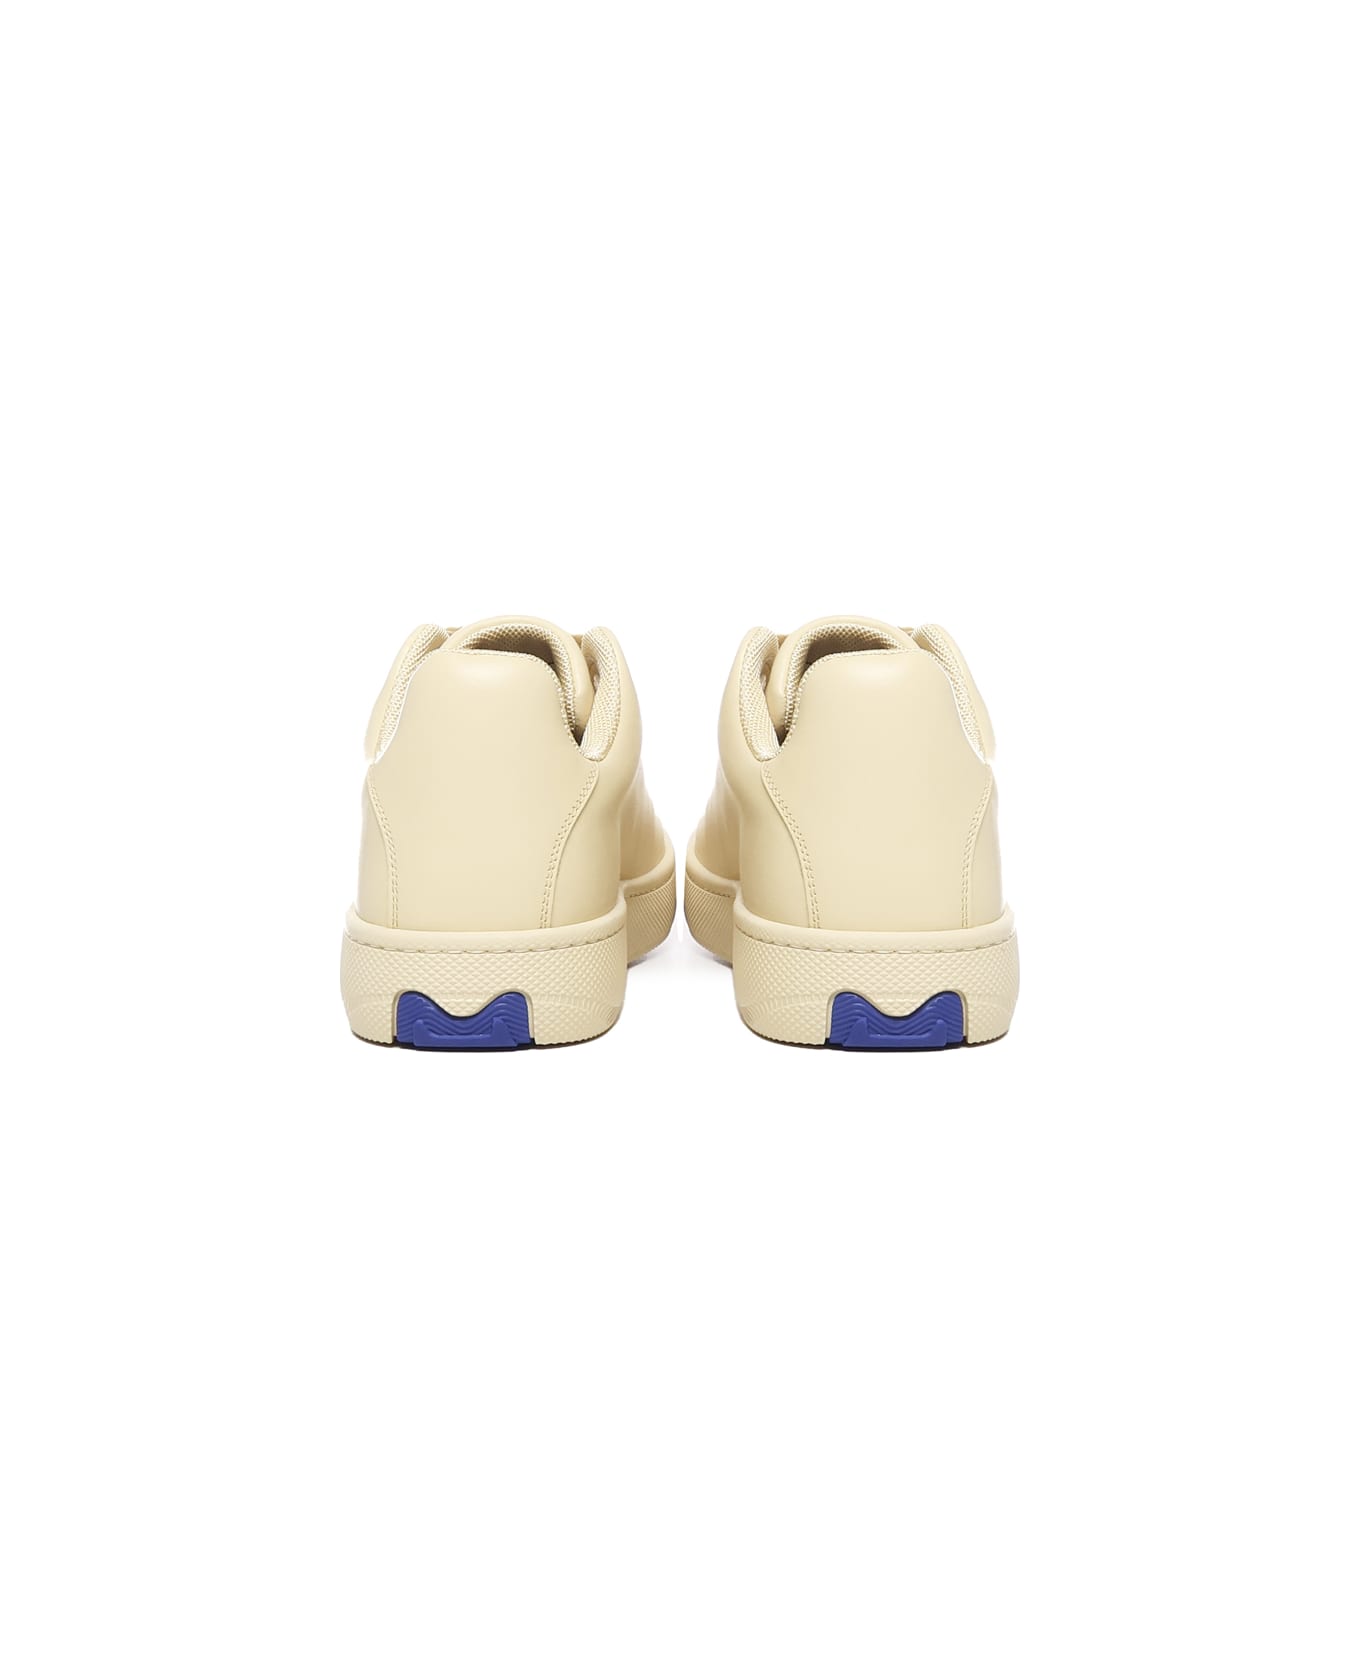 Burberry Box Sneaker In Leather - Yellow